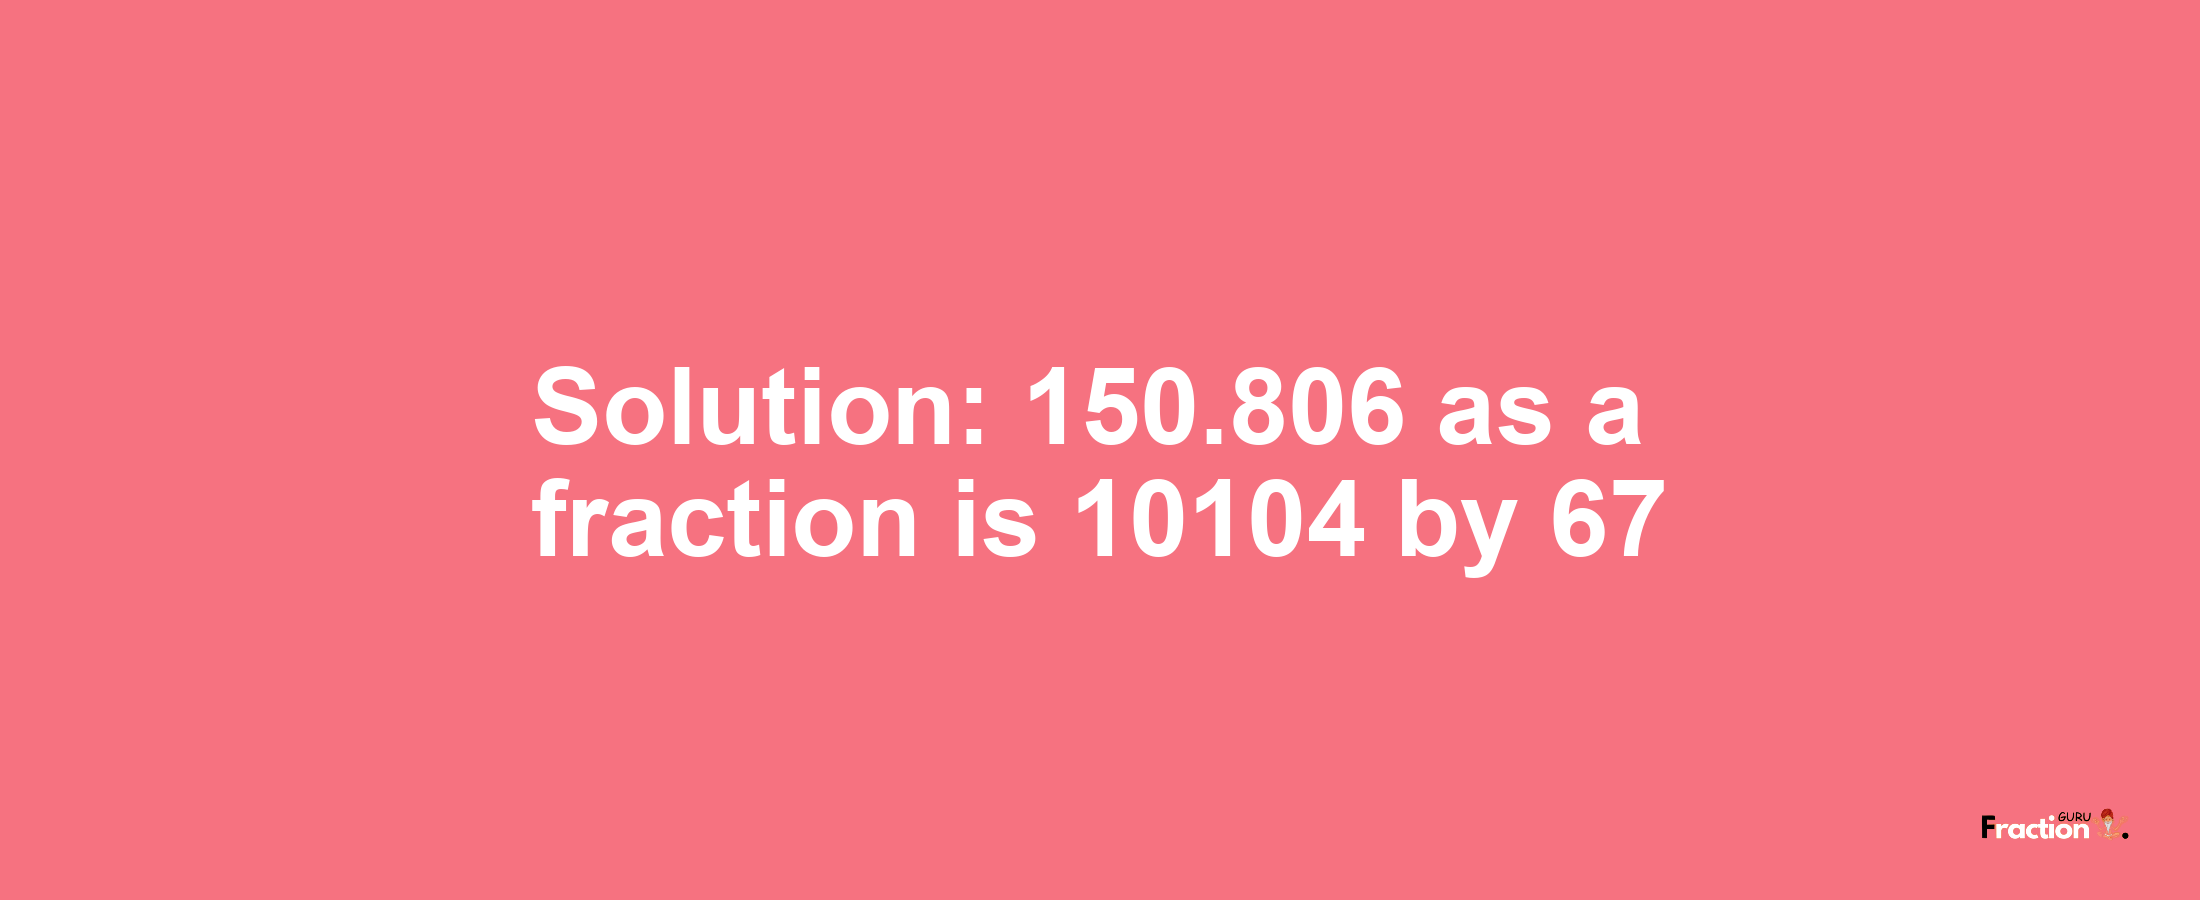 Solution:150.806 as a fraction is 10104/67